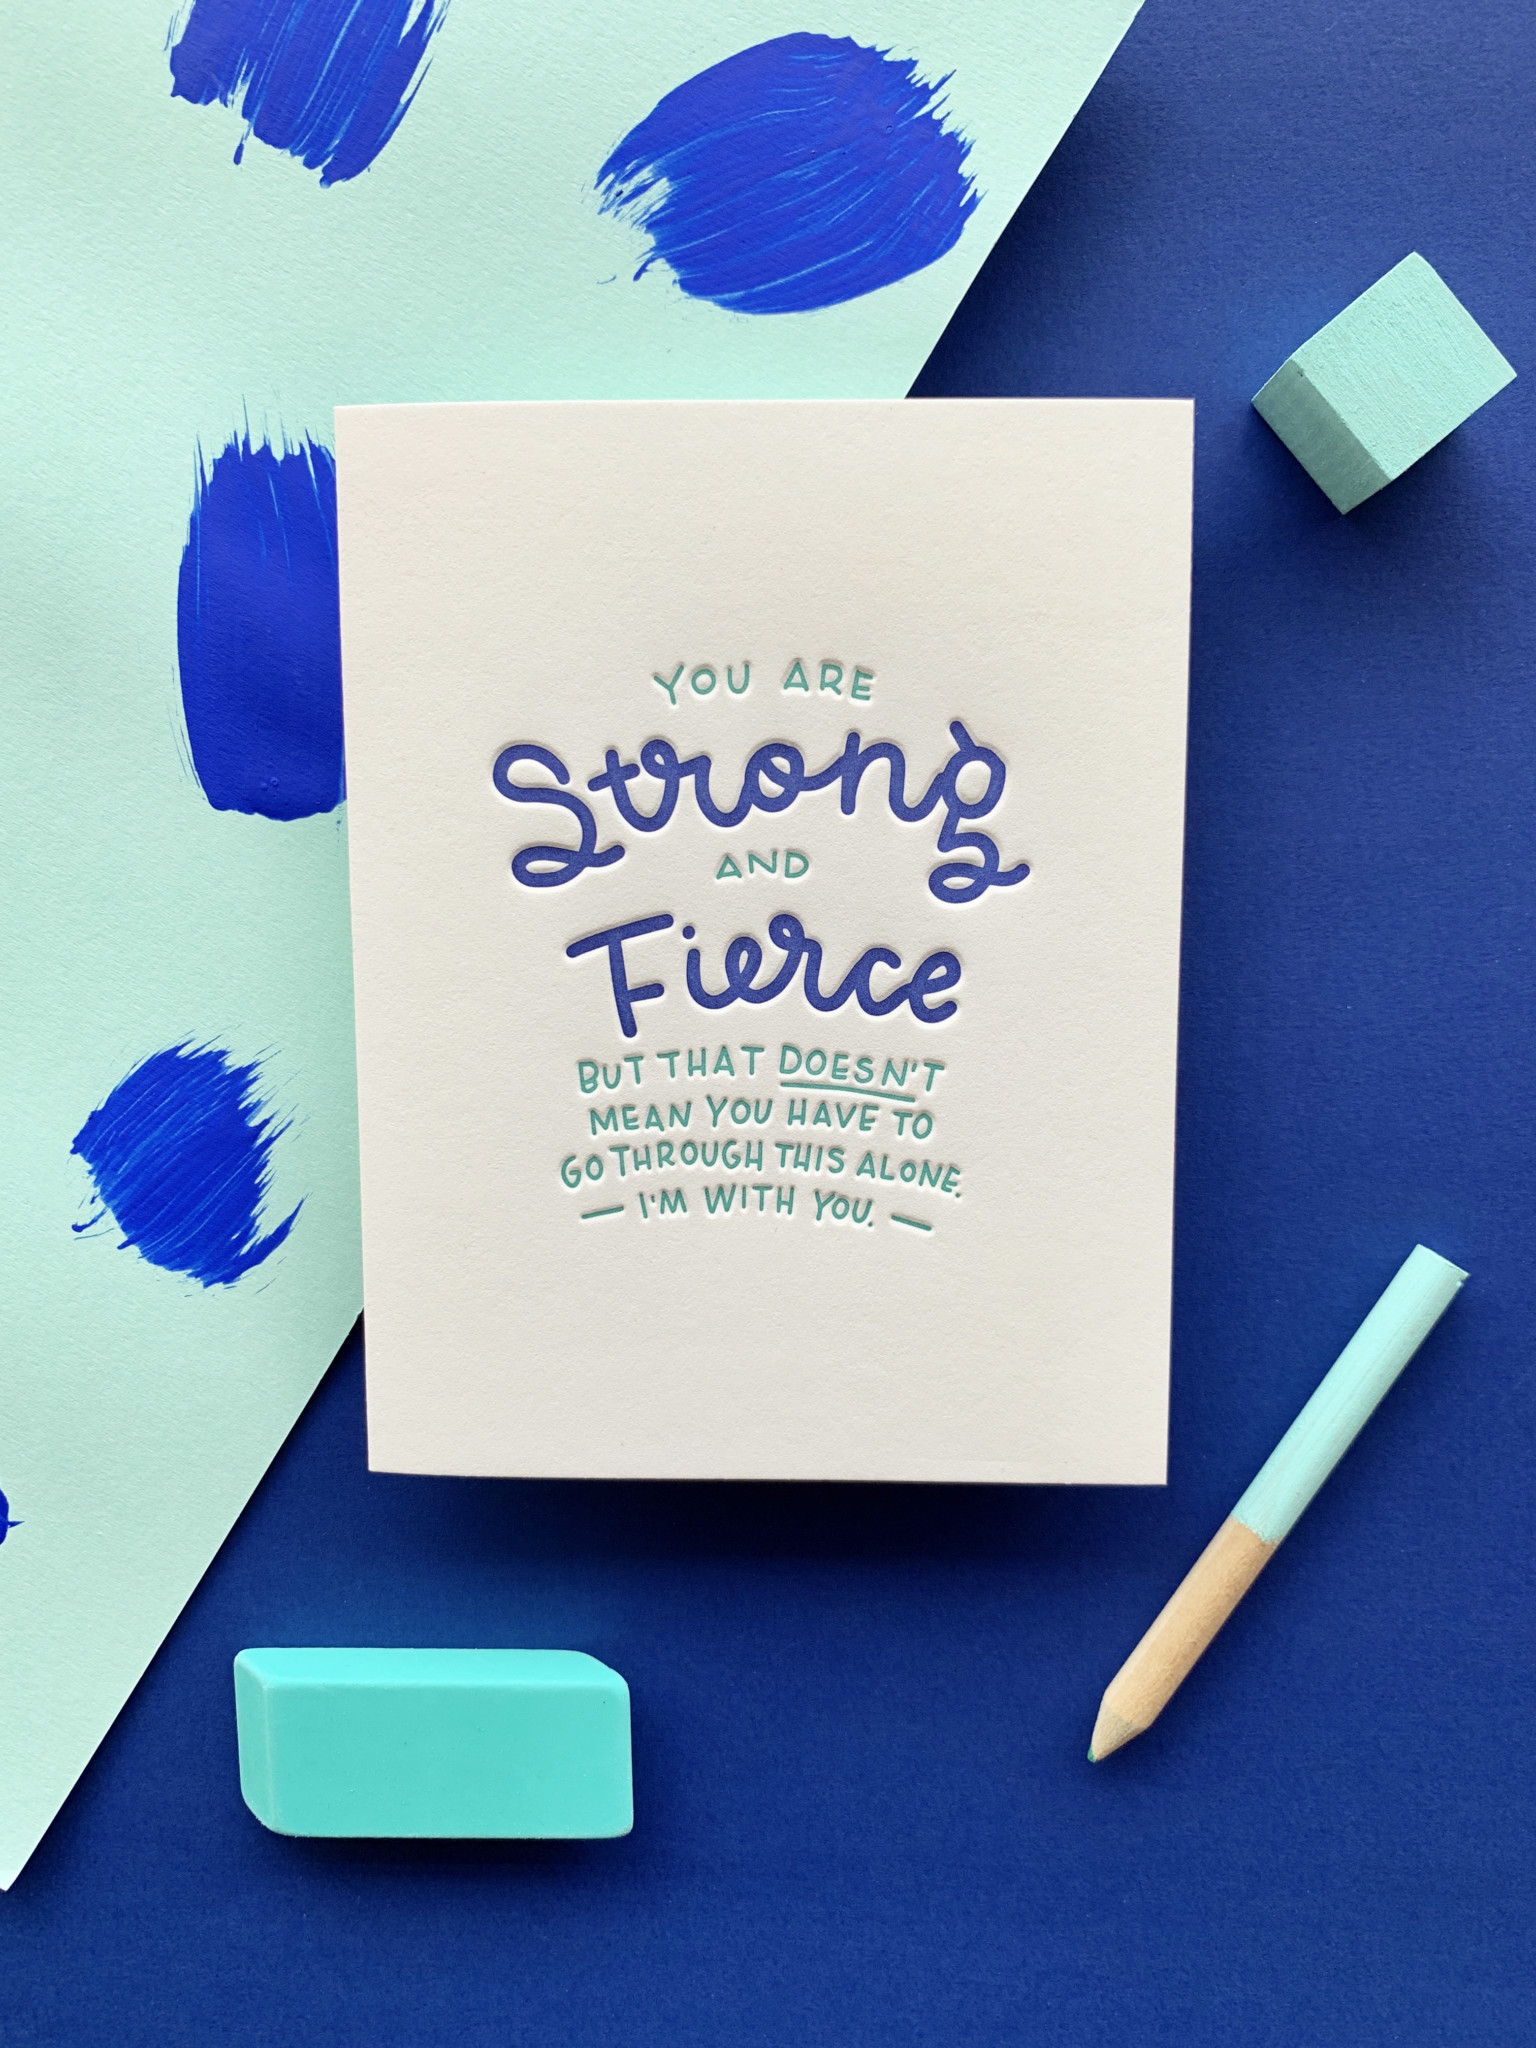 Greeting card features hand-lettered sentiment that reads "You are strong and fierce by that doesn't mean you have to go through this along. I'm with you." Card is positioned on a teal and bright blue paper background.